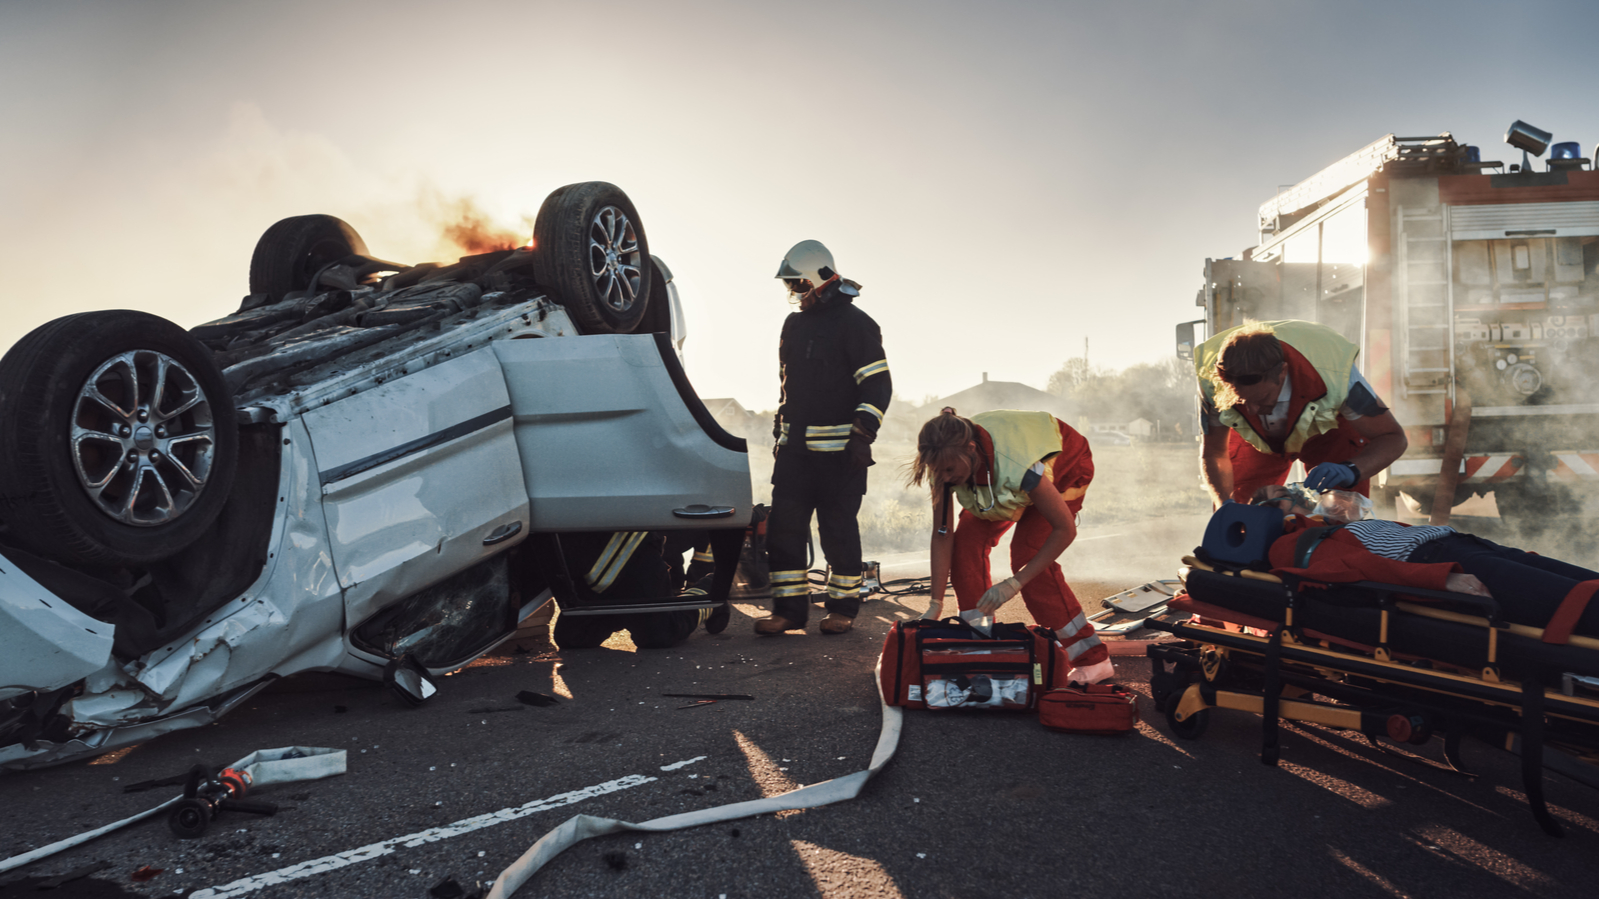 Truck Accident Law Firm in Crystal Lake, IL | Crystal Lake, IL Truck Accident Lawyer | Burger Law